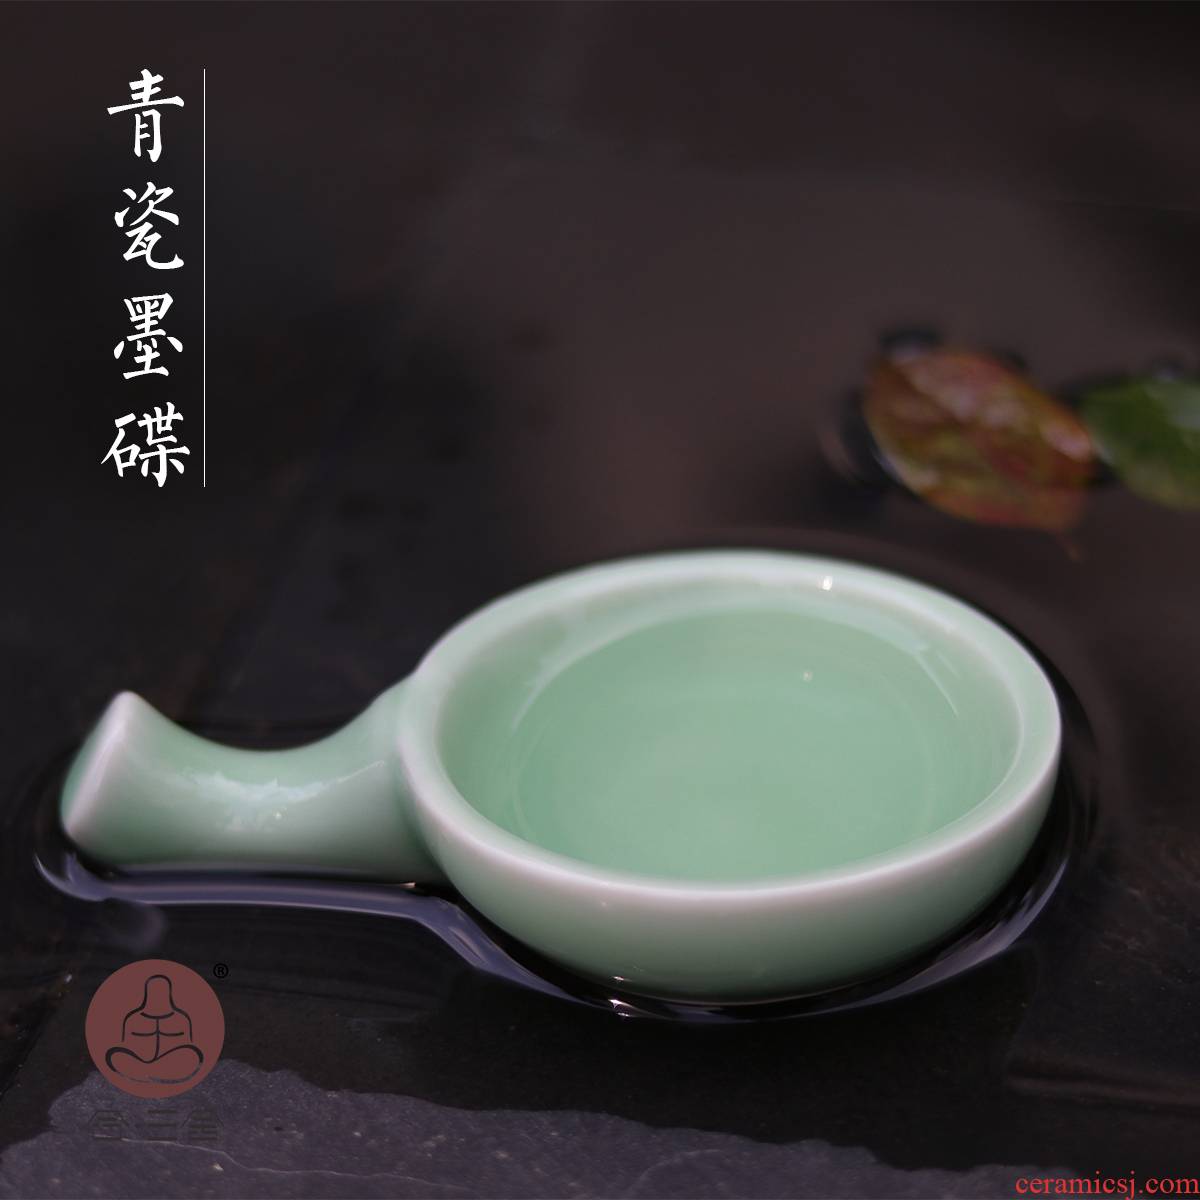 Celadon with pen and ink dish "four Chinese painting supplies writing brush produced in huzhou writing brush calligraphy sheng ceramic inkstone ink three shekels